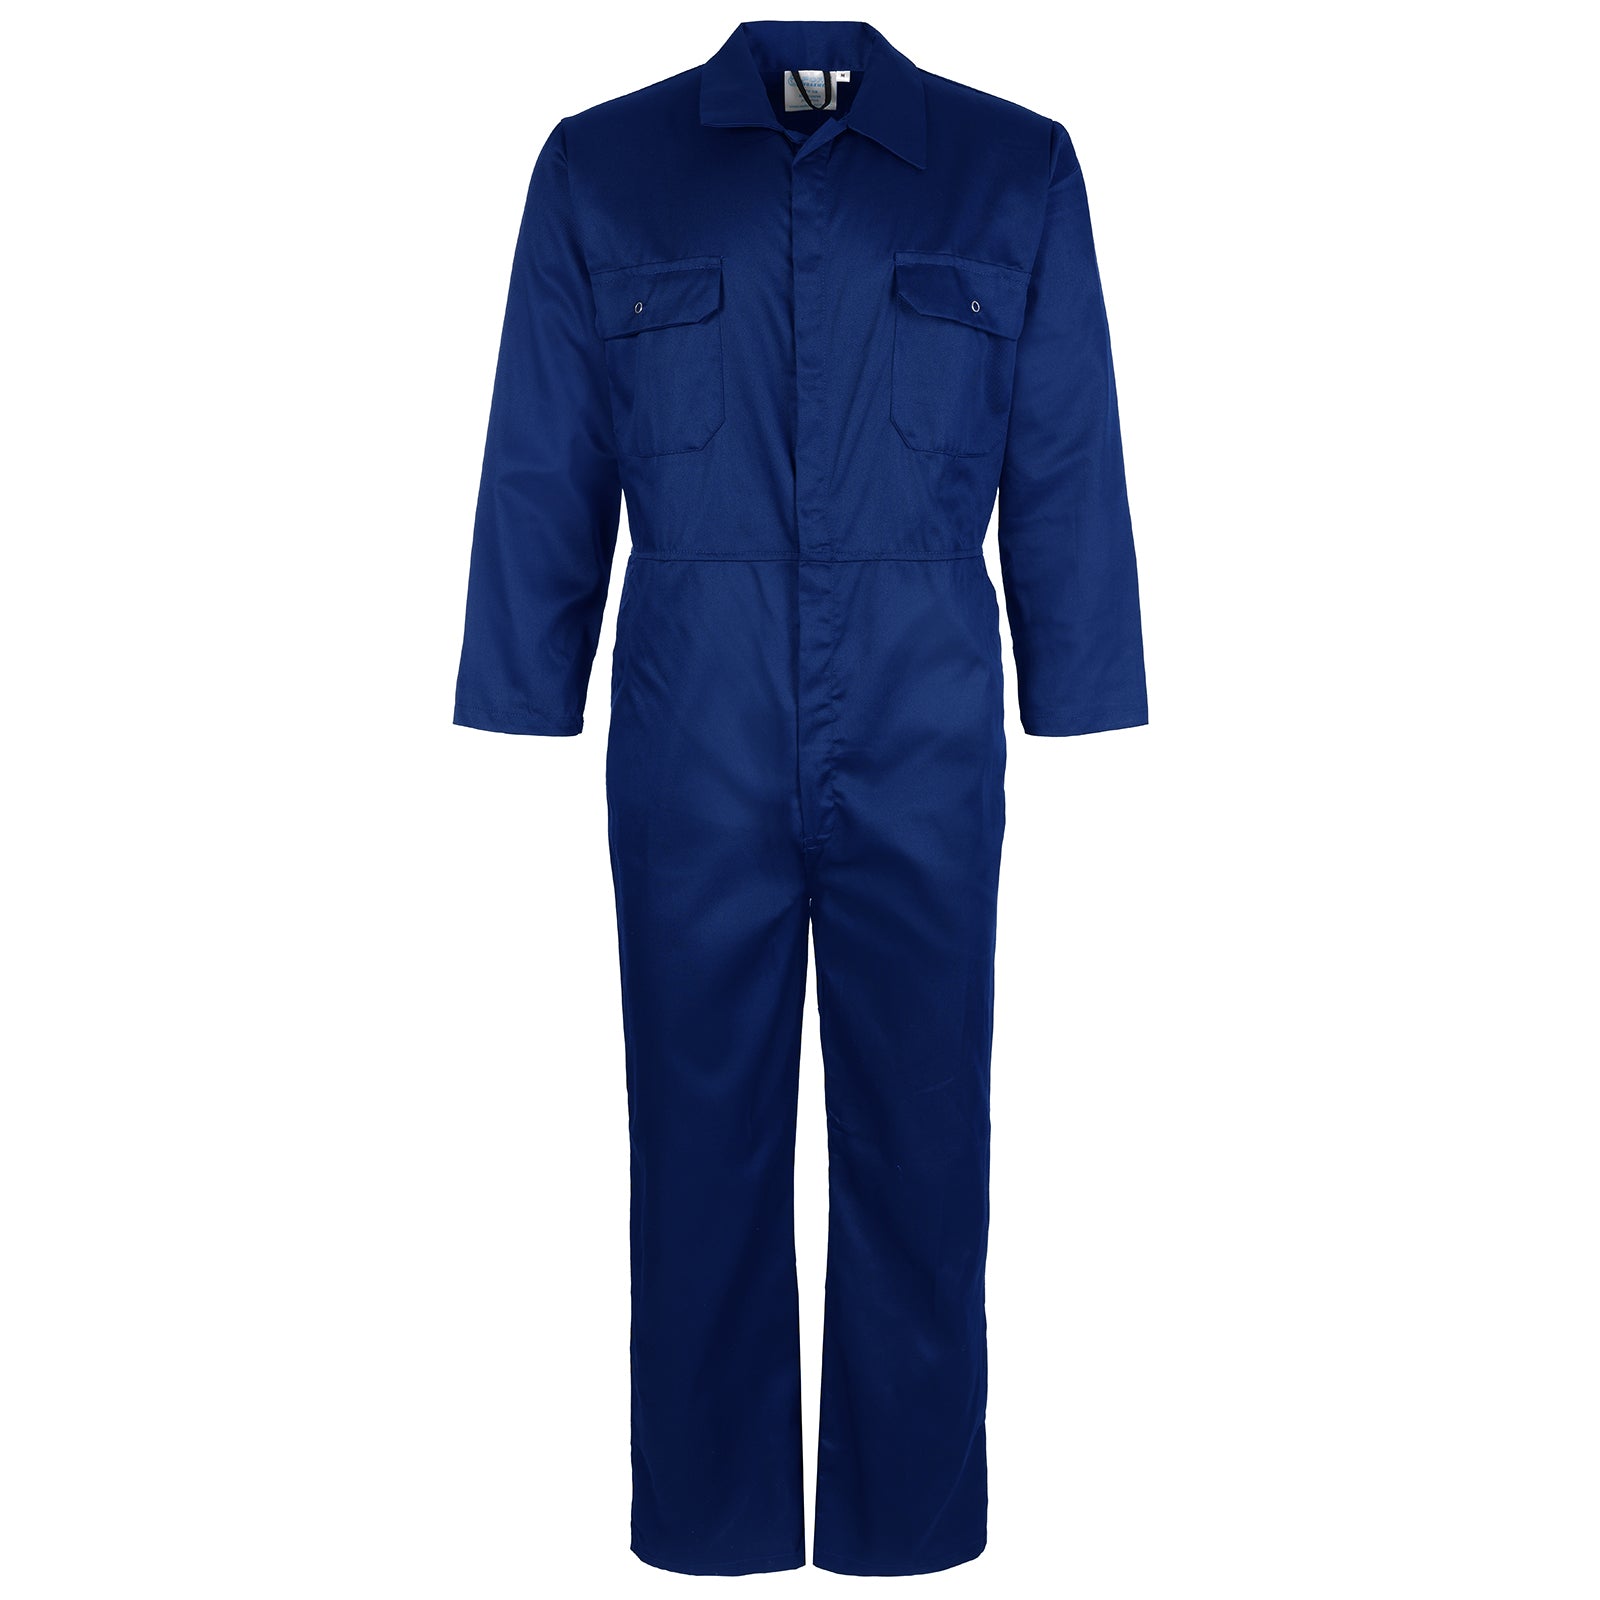 Fort Workwear Workforce Coverall